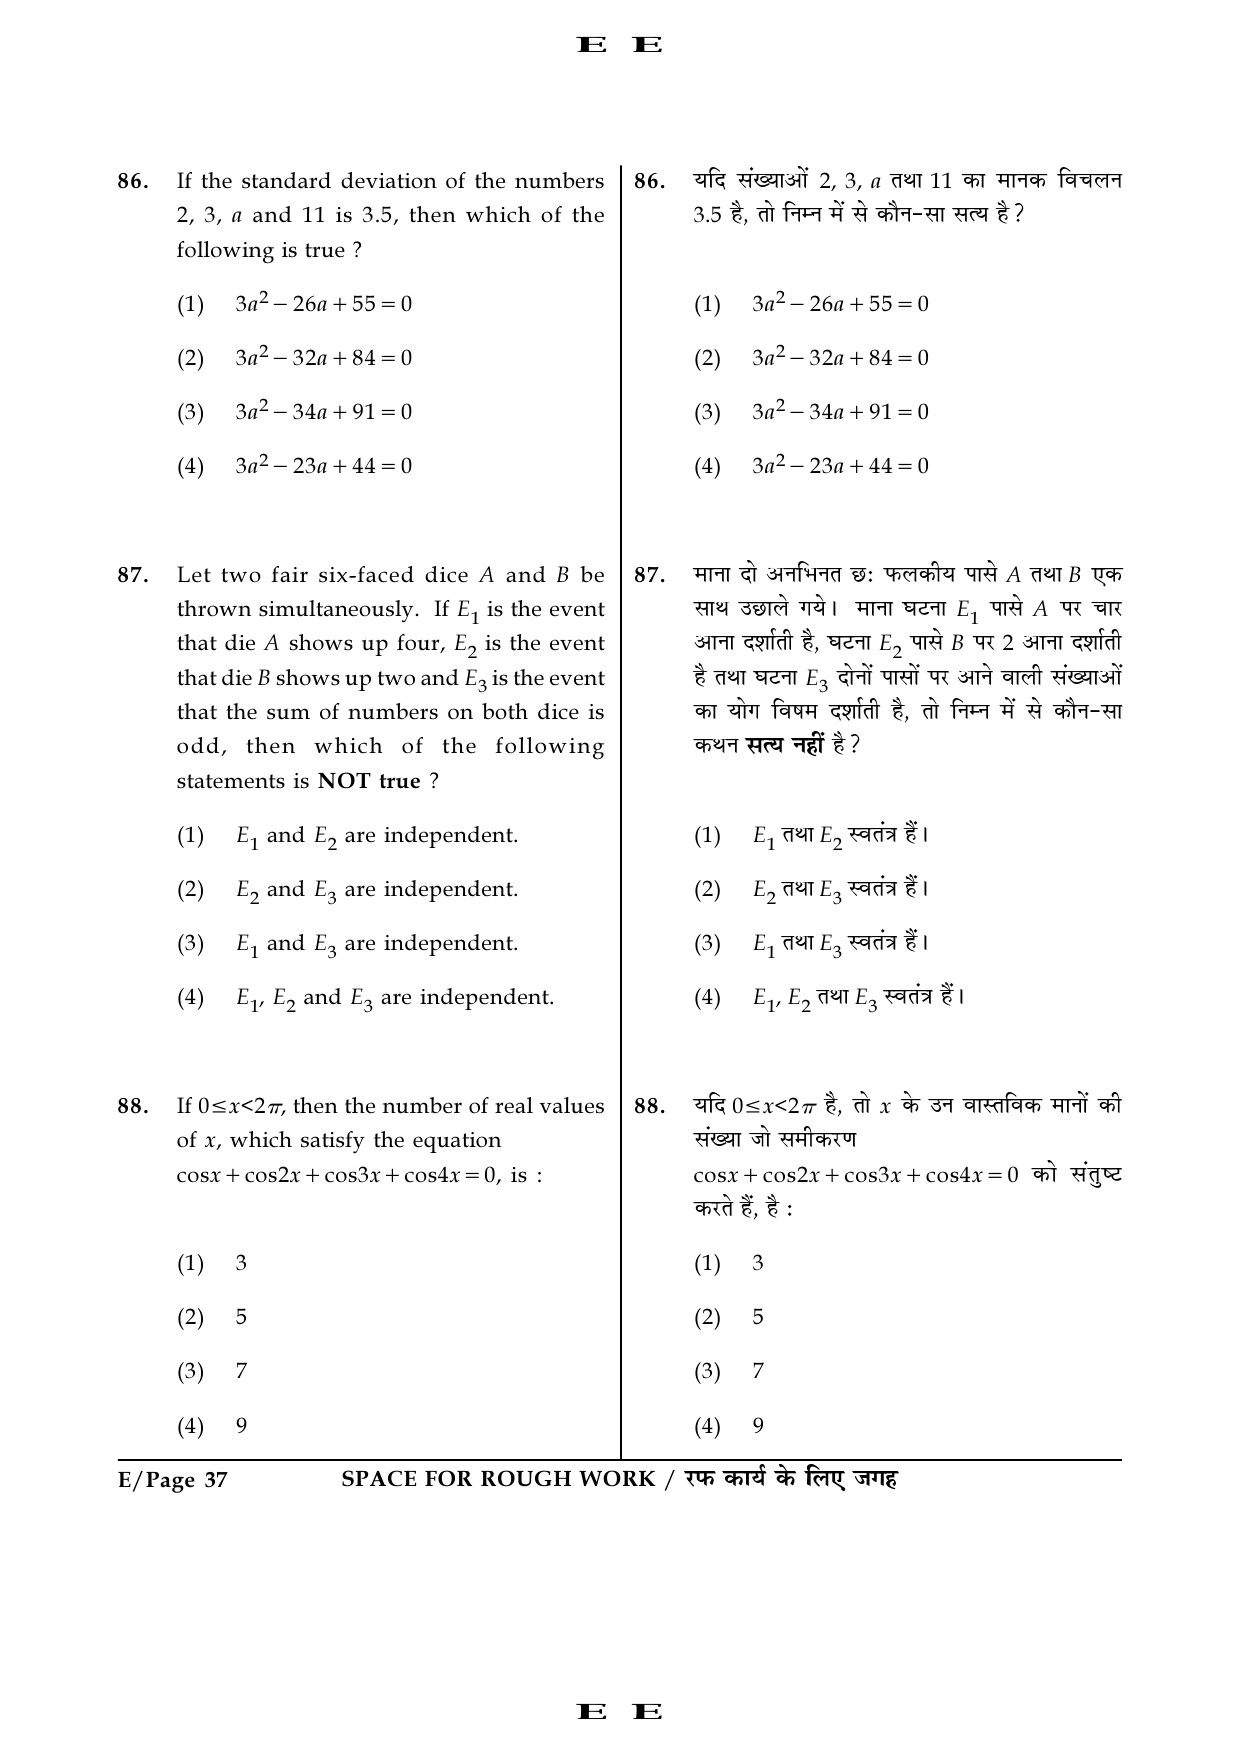 JEE Main Exam Question Paper 2016 Booklet E 37